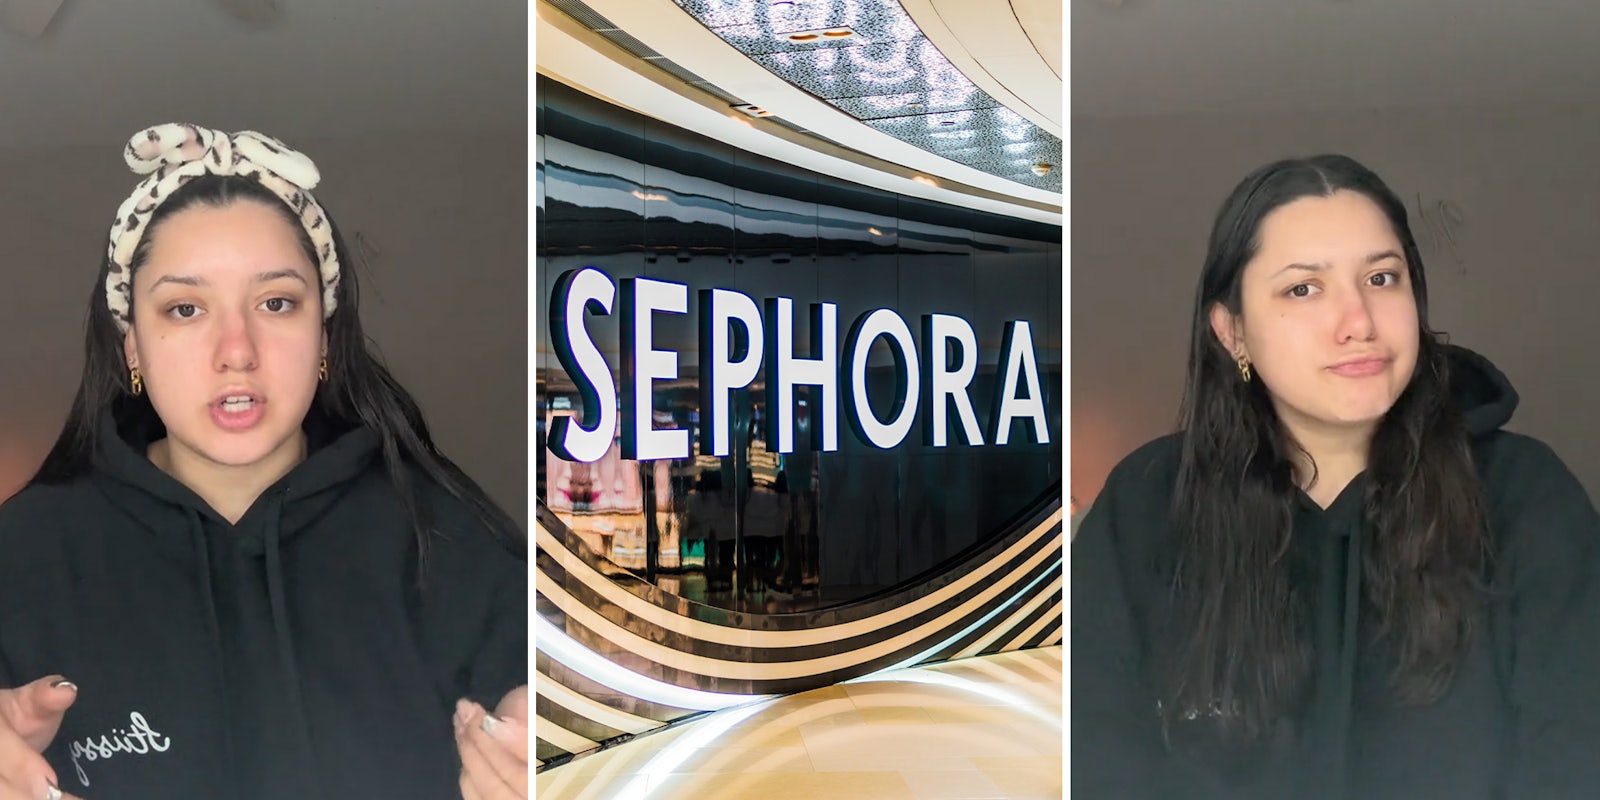 Sephora worker blasts 10-year-olds who are ‘way too young’ to be shopping there—and their moms